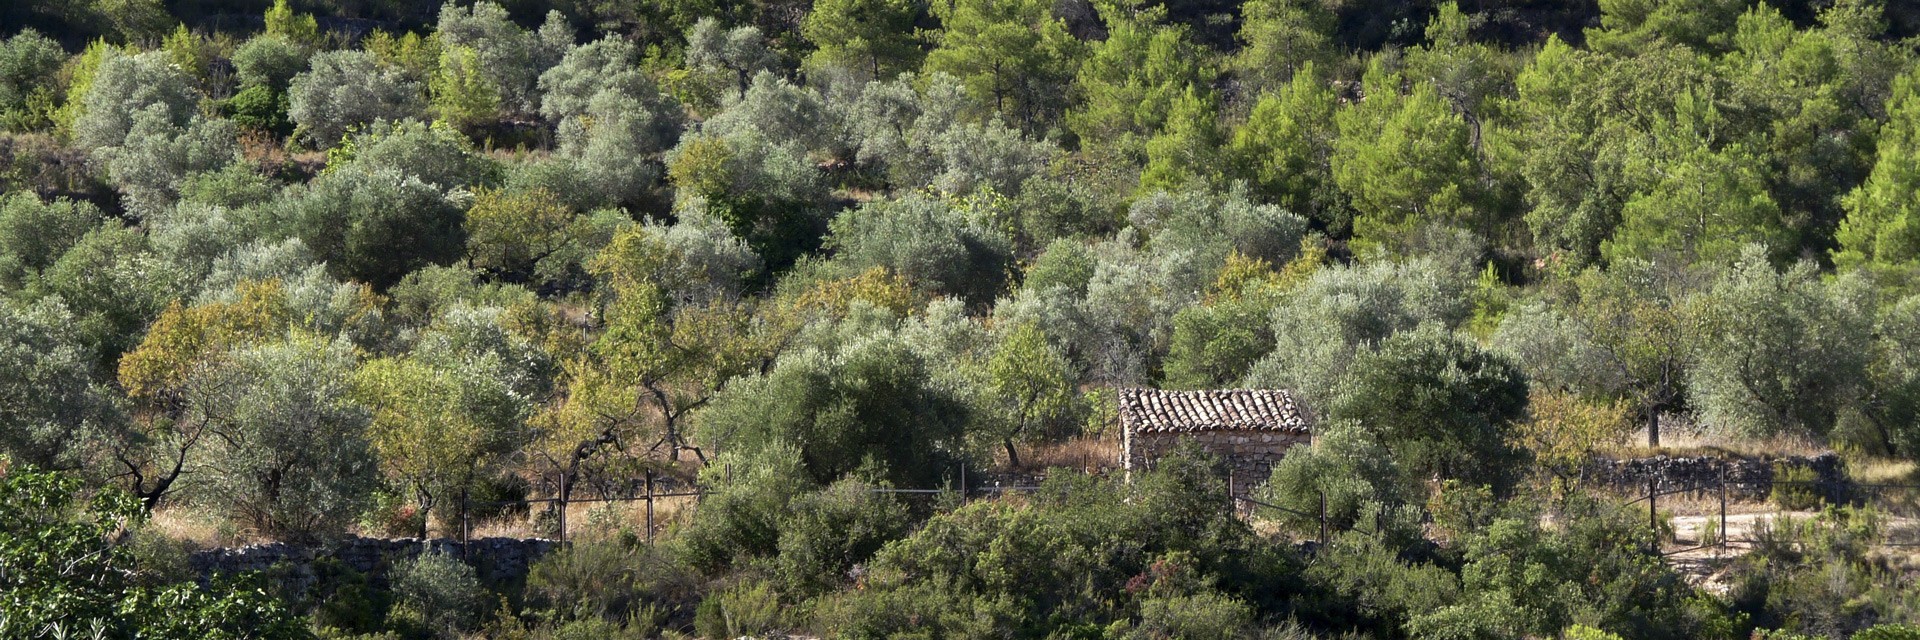 Olive groves and biodiversity in Les Garrigues (Lleida)